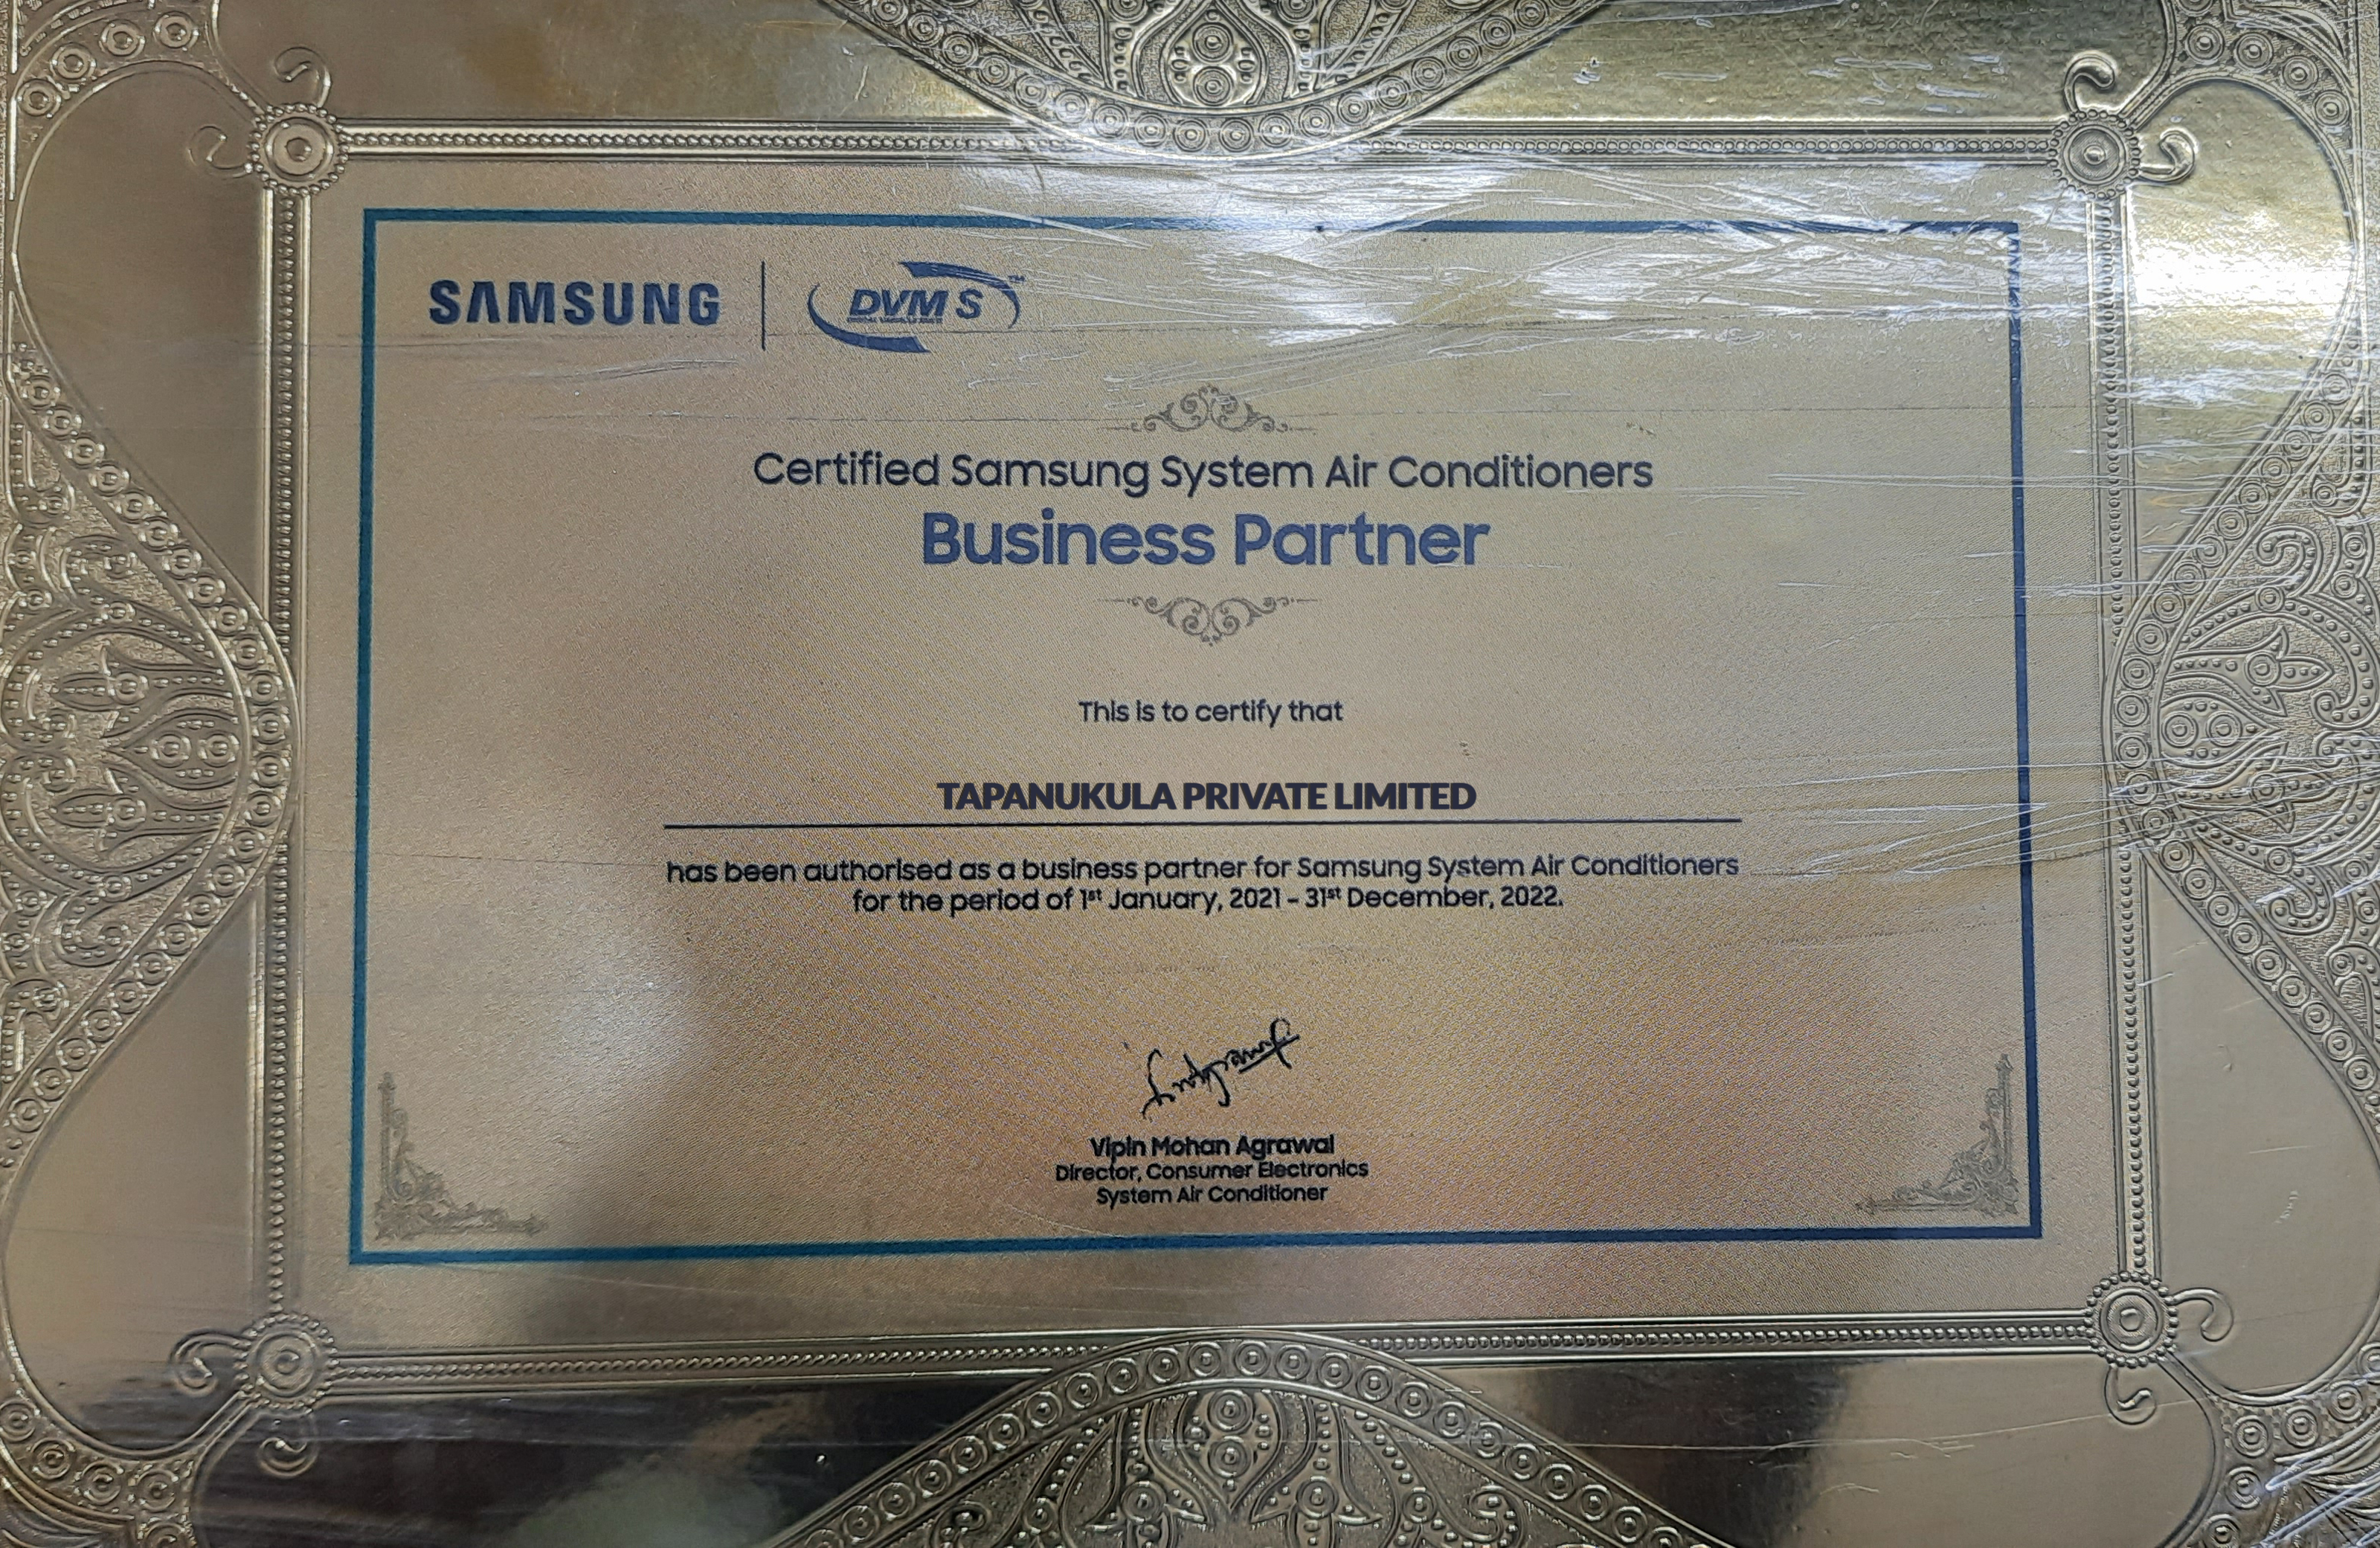 Tapanukula Private Limited Samsung Business Partner Certificate